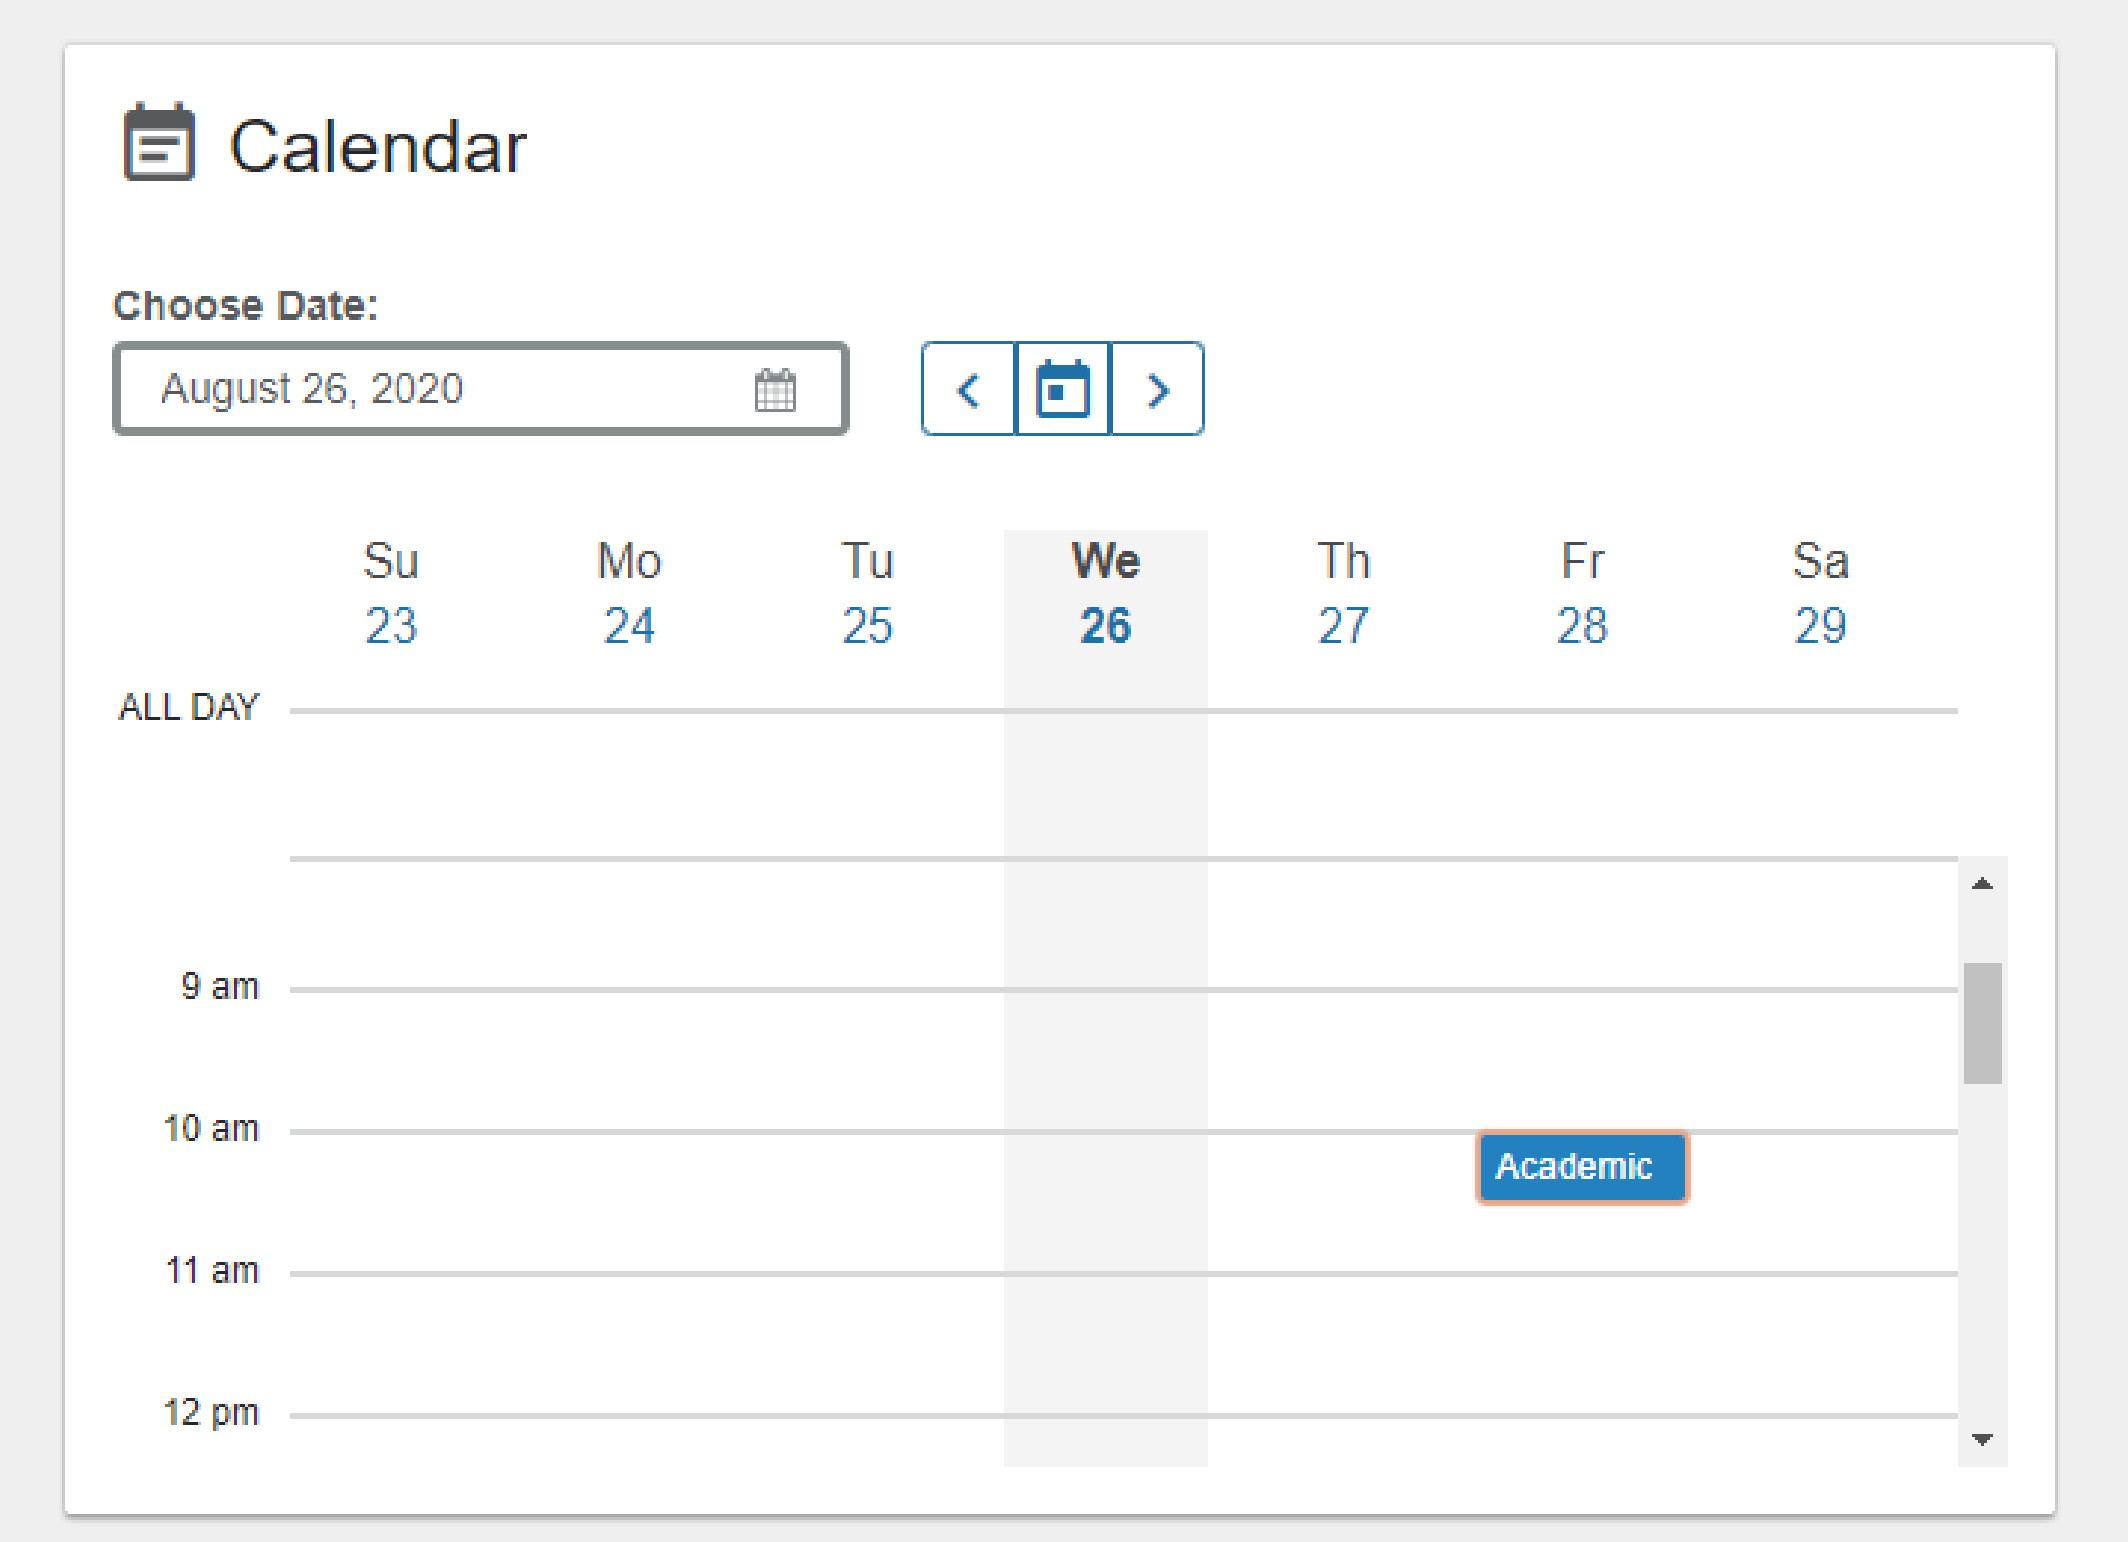 This shows the calendar and how an appointment for August 28, 2020 at 10am would show at that position on the calendar.